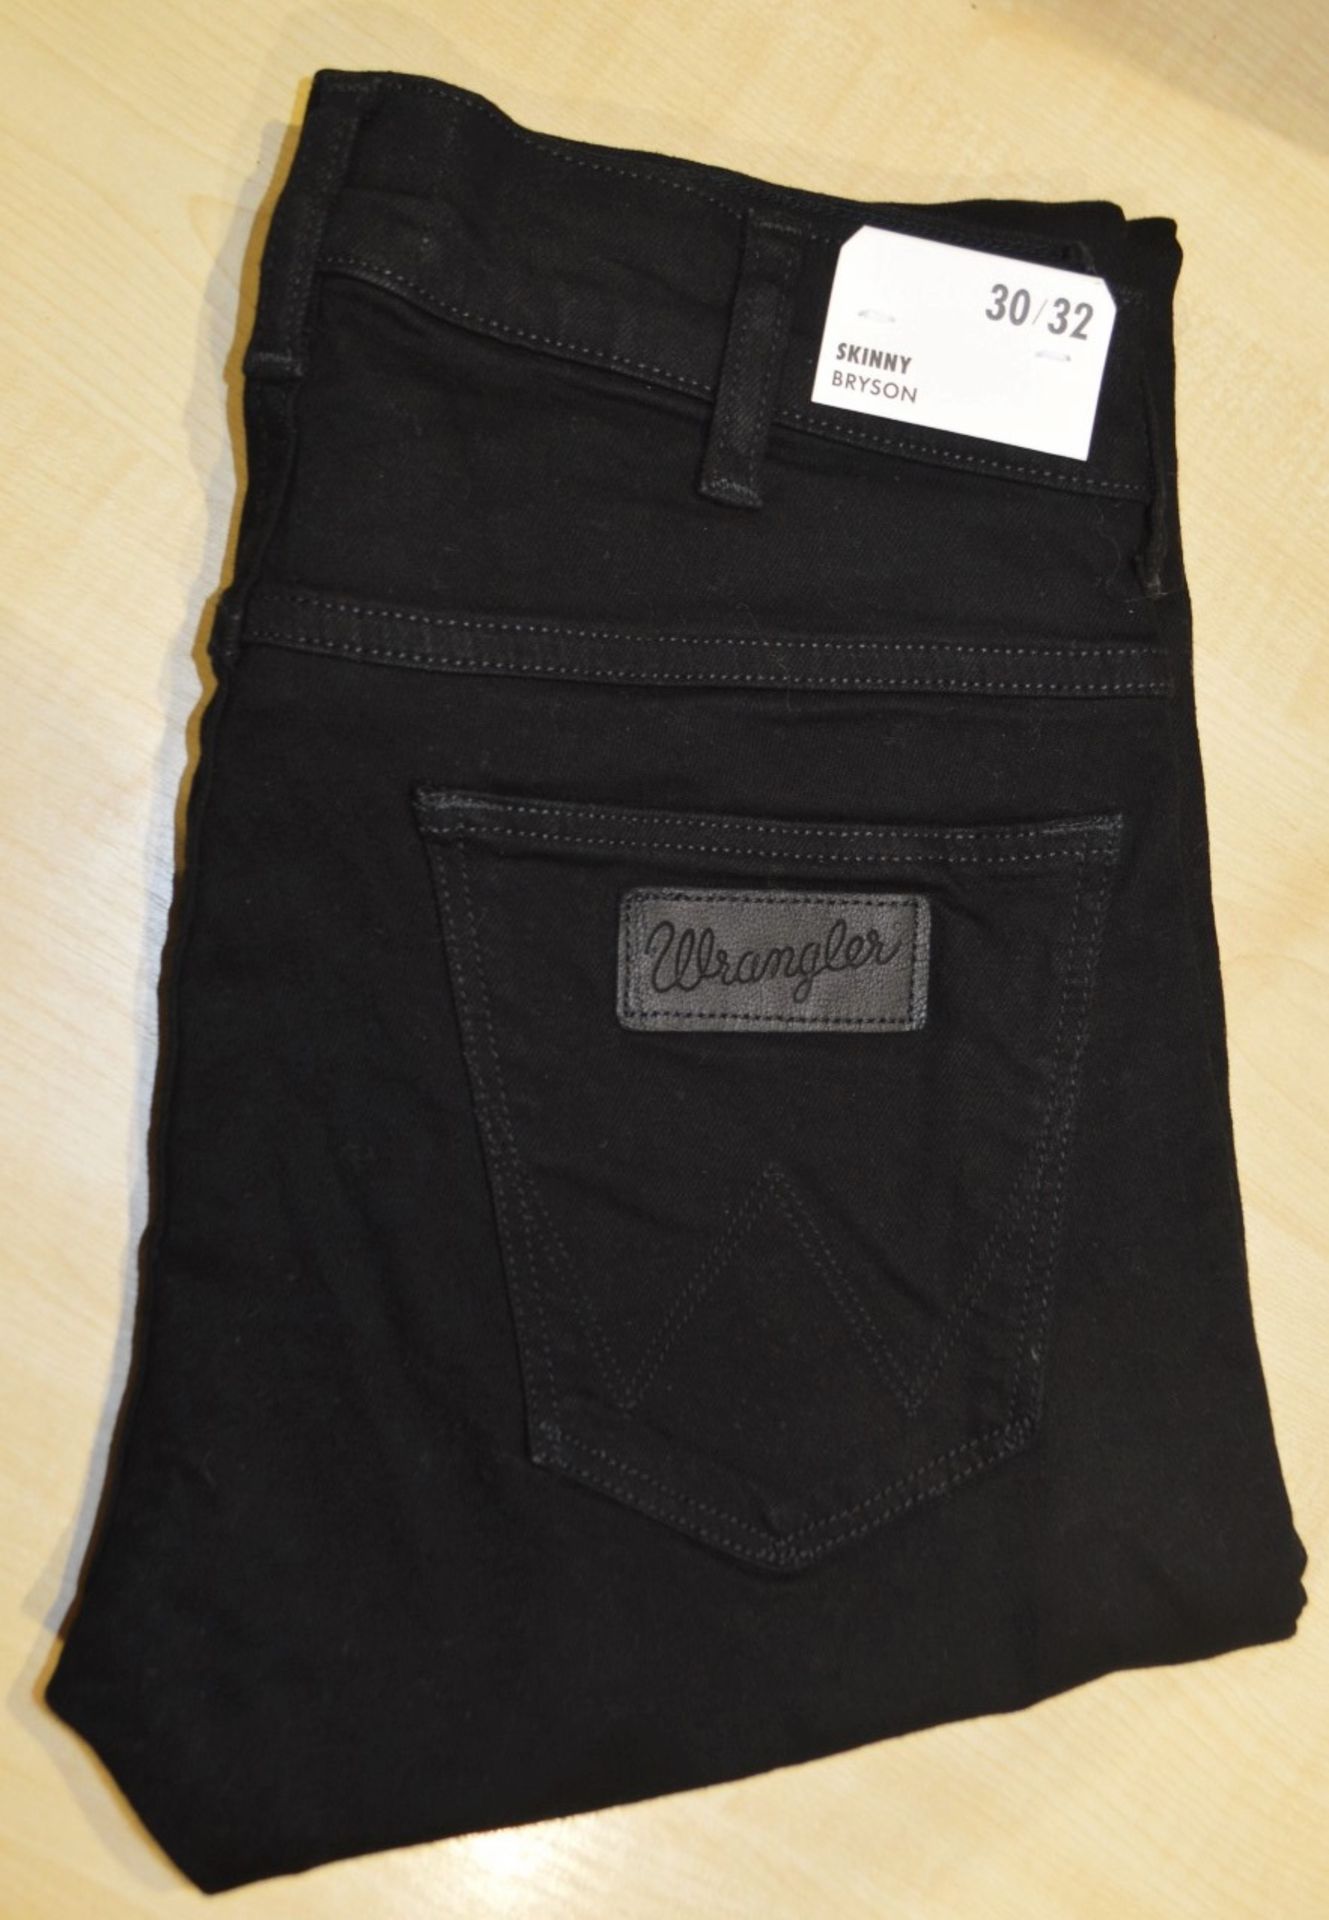 1 x Pair Of Men's Genuine Wrangler Jeans In Black - Size: 30/32 - Preowned, Like New With Tags - - Image 3 of 10